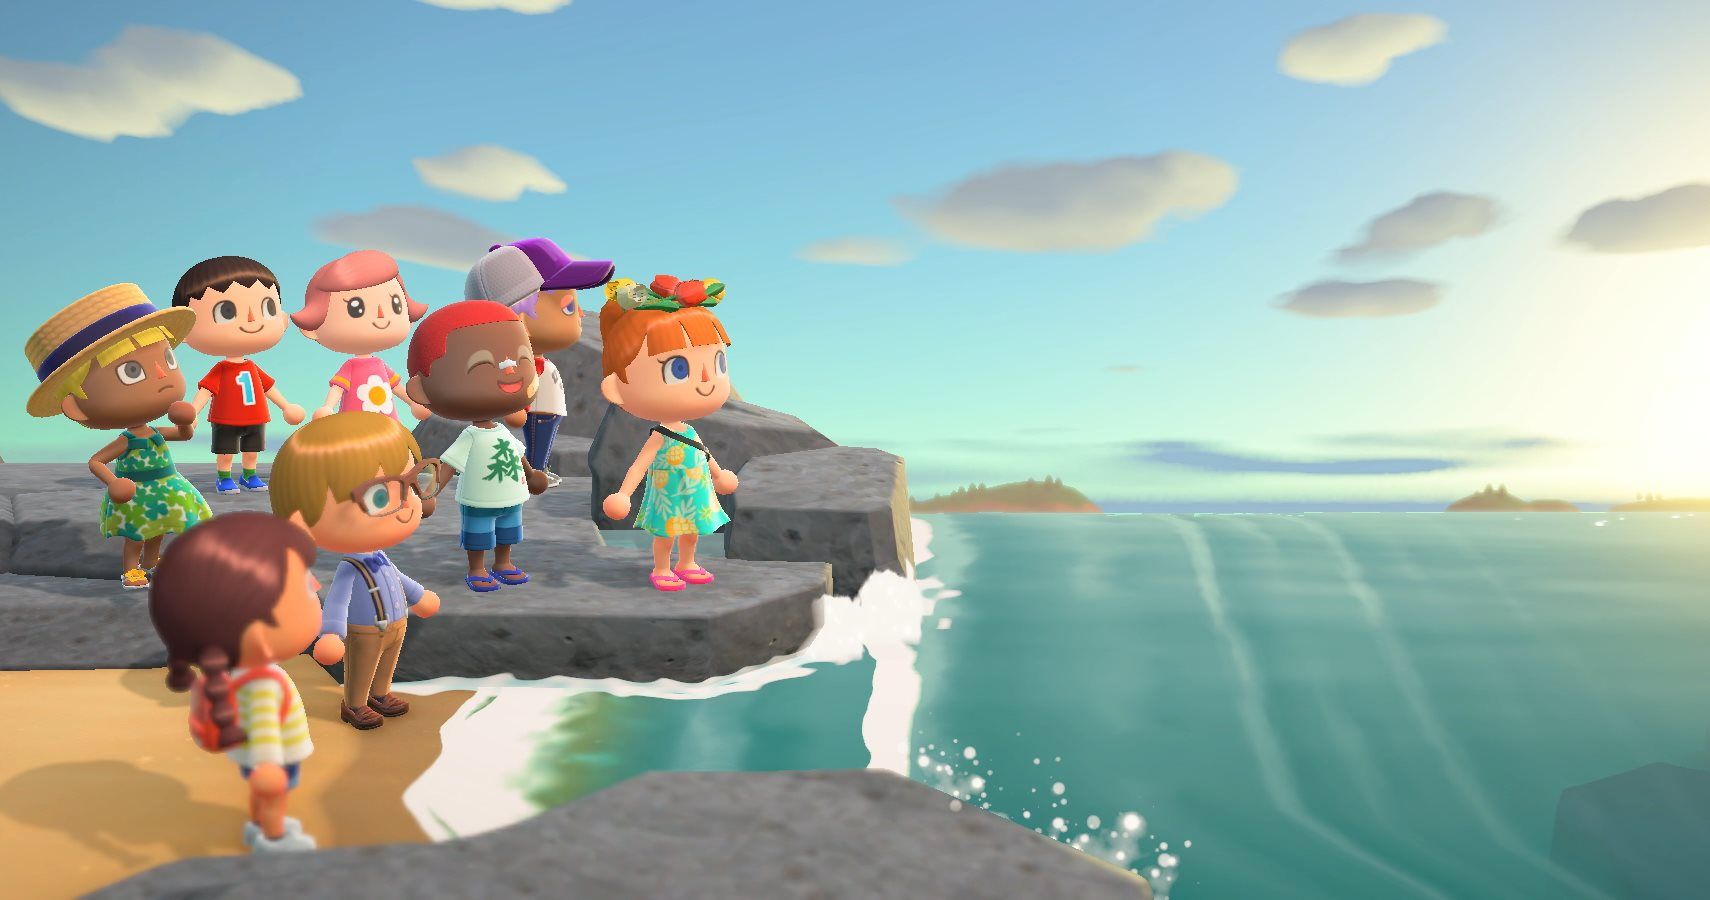 E3 2019: For The First Time, Animal Crossing's Villagers Can Be Any Race And Gender-Fluid